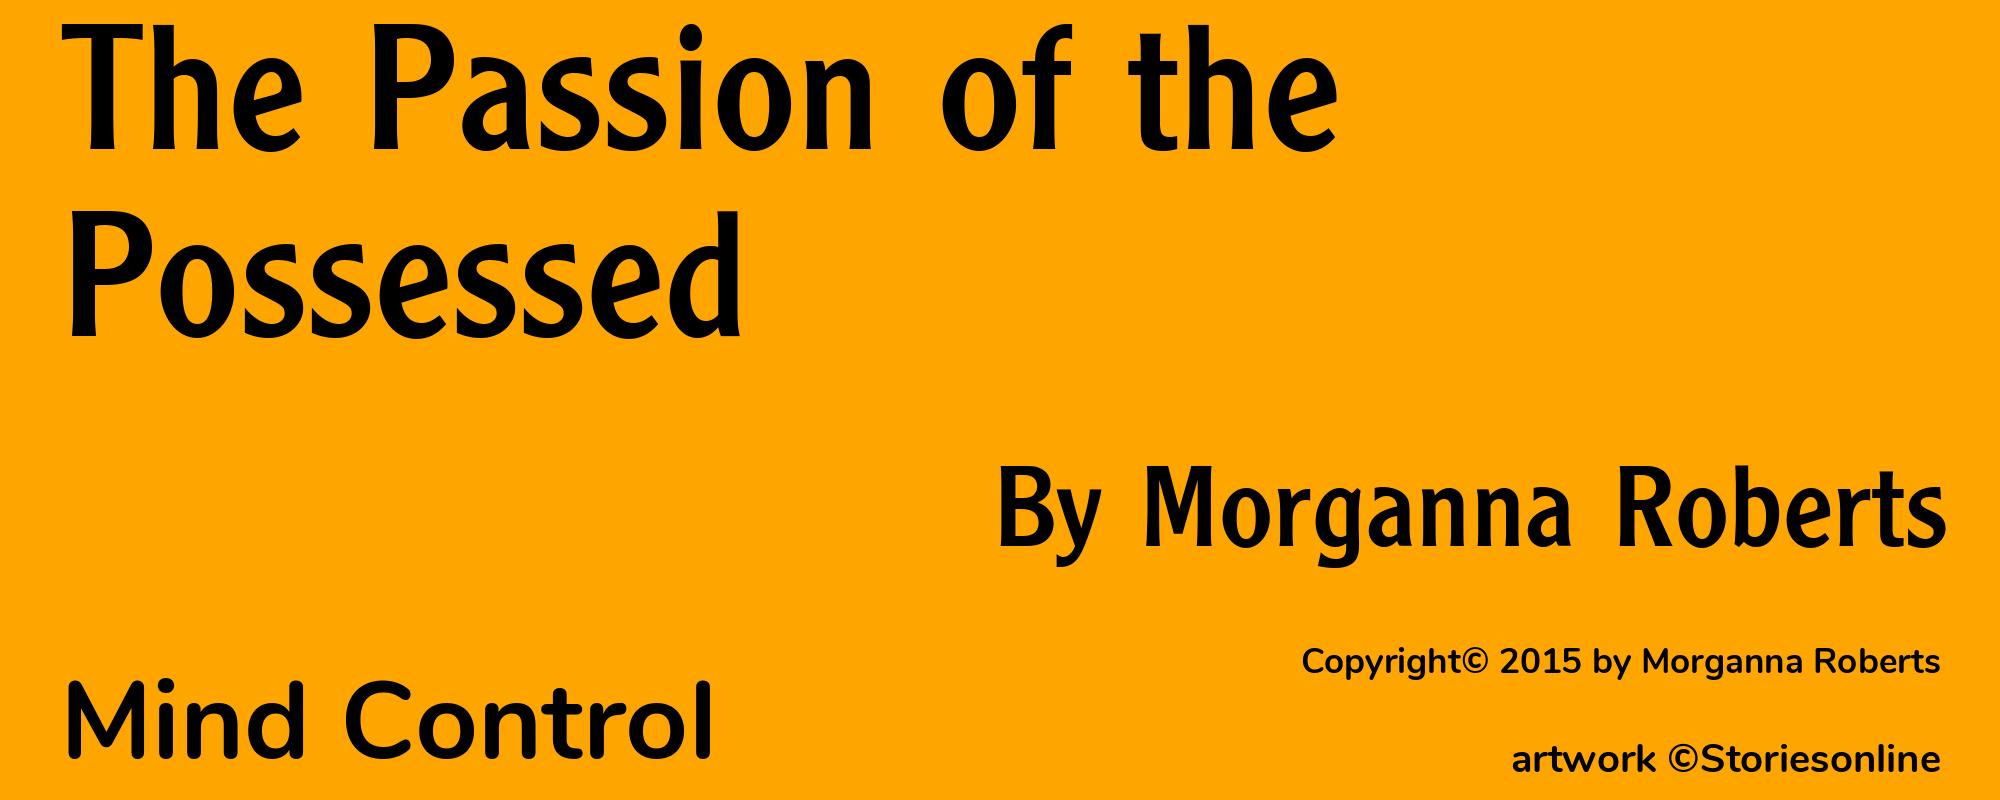 The Passion of the Possessed - Cover